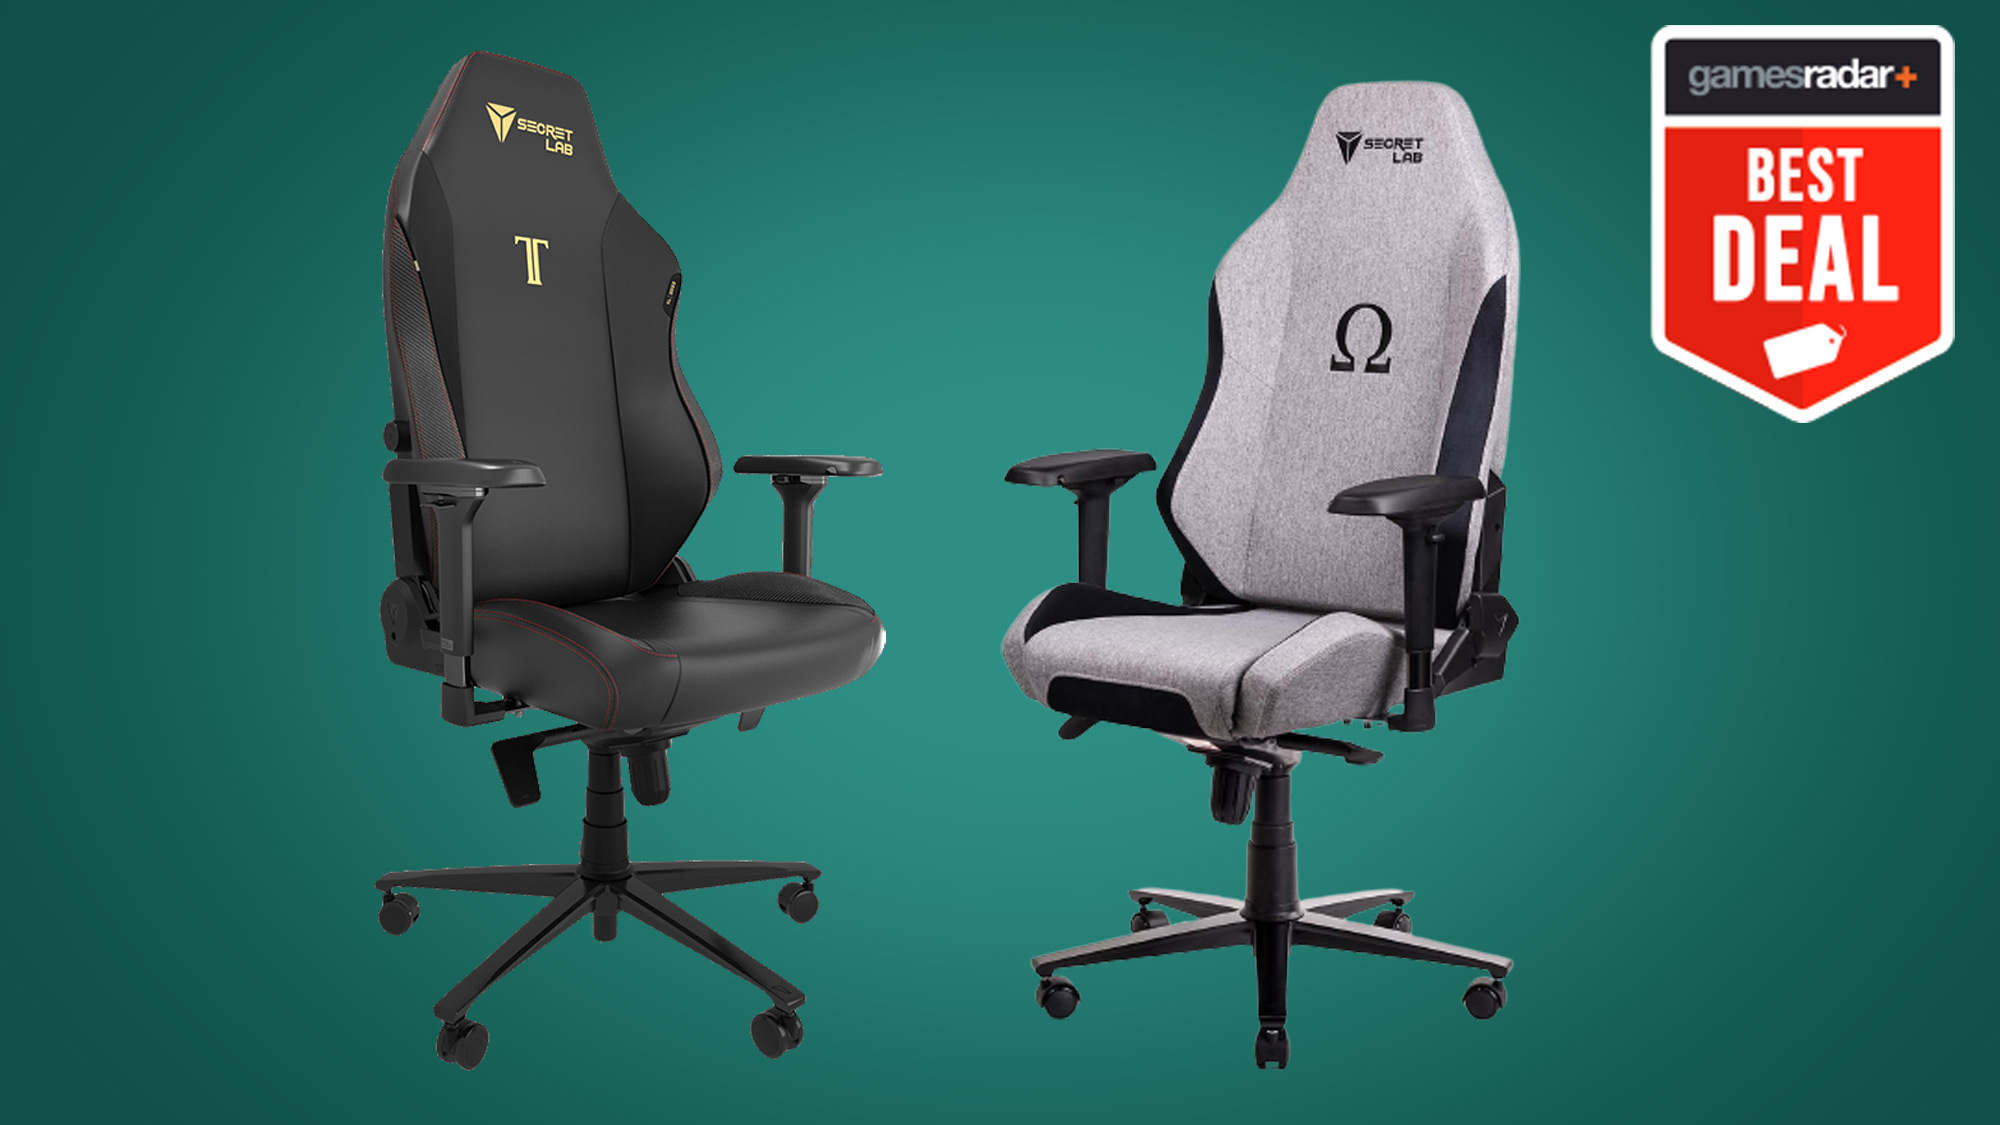 Cheap Secret lab gaming chair cheapest from Razer